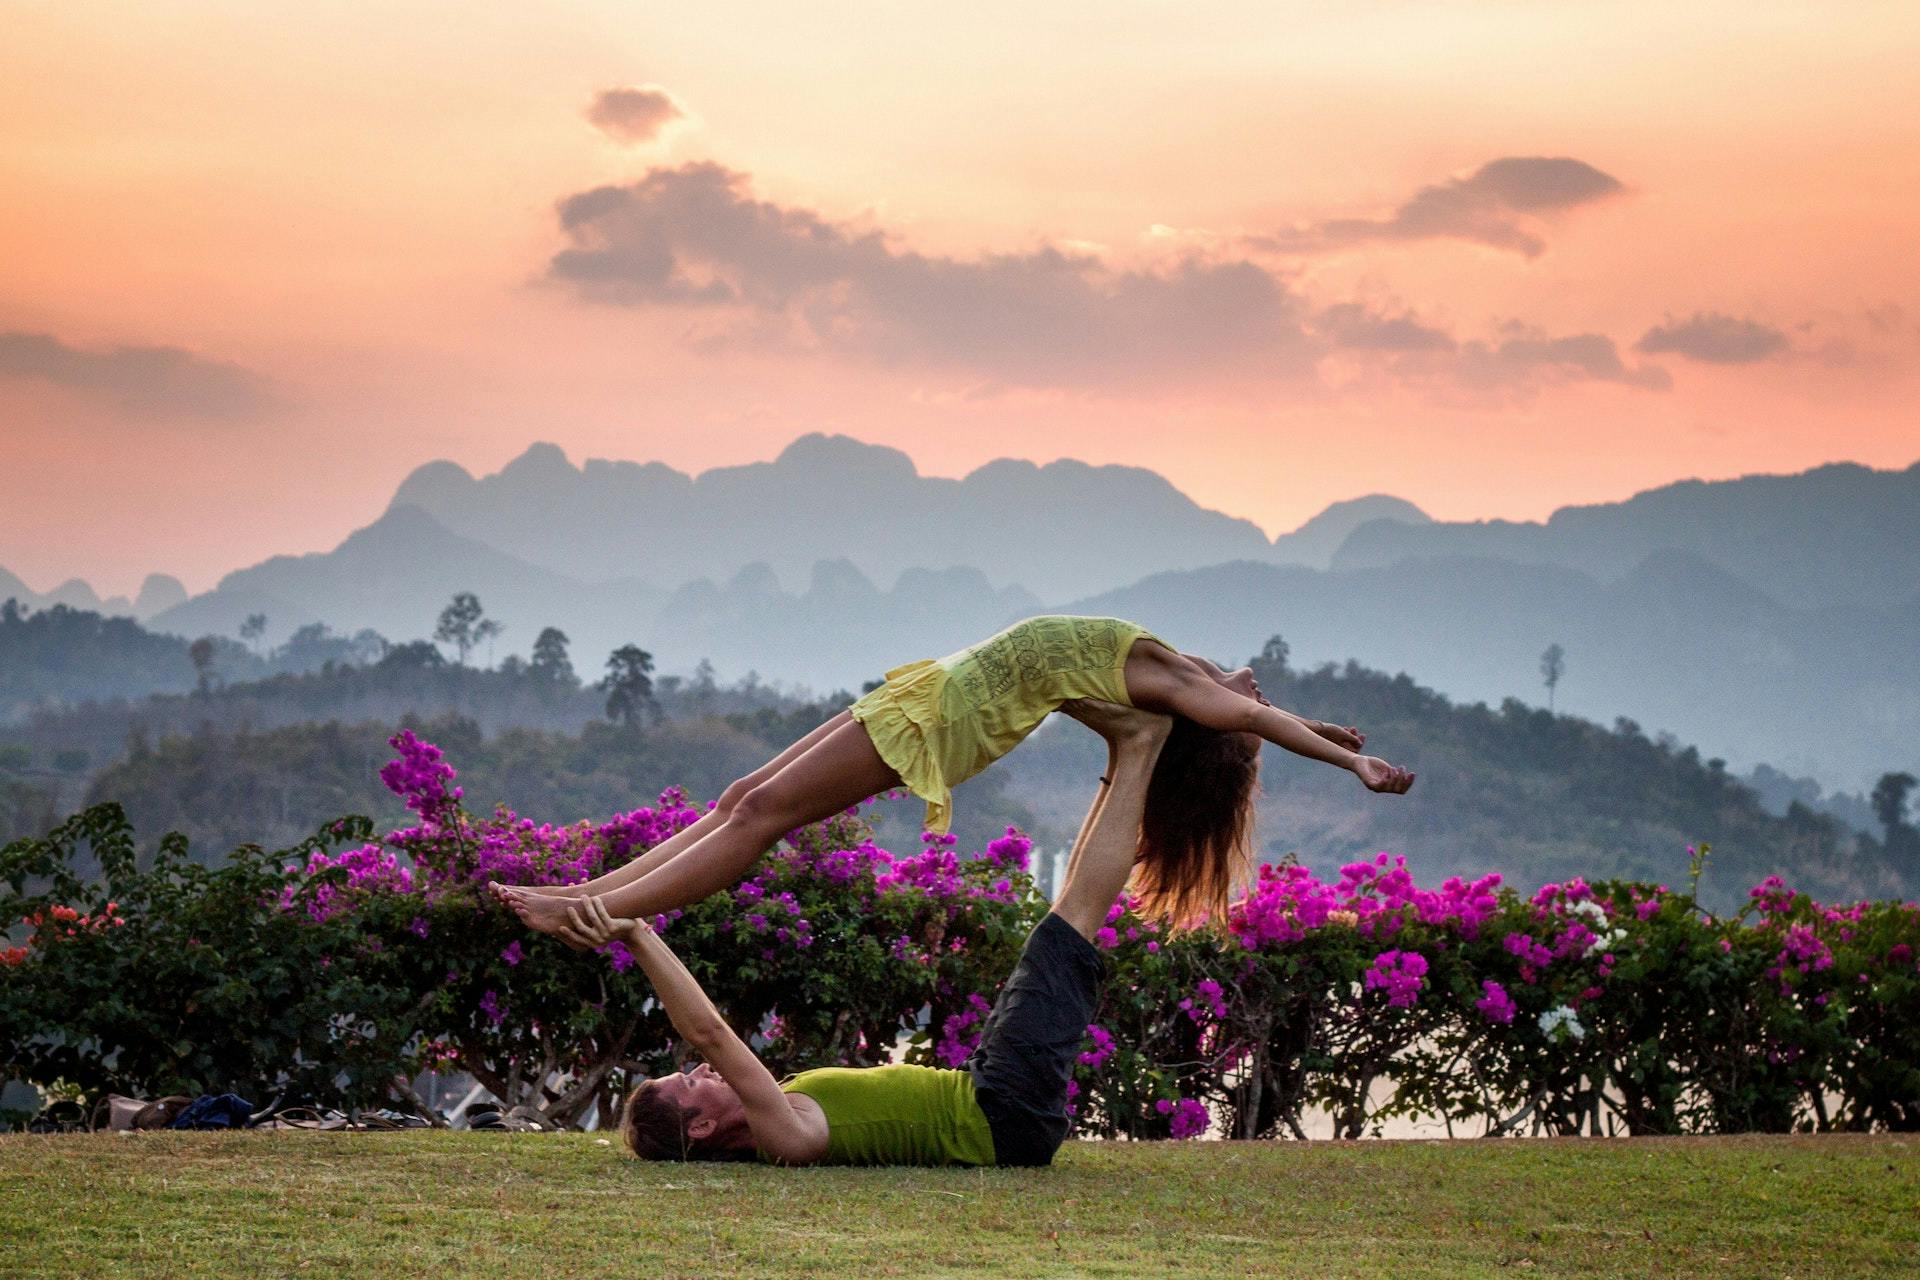 Two people doing acroyoga in front of mountains.